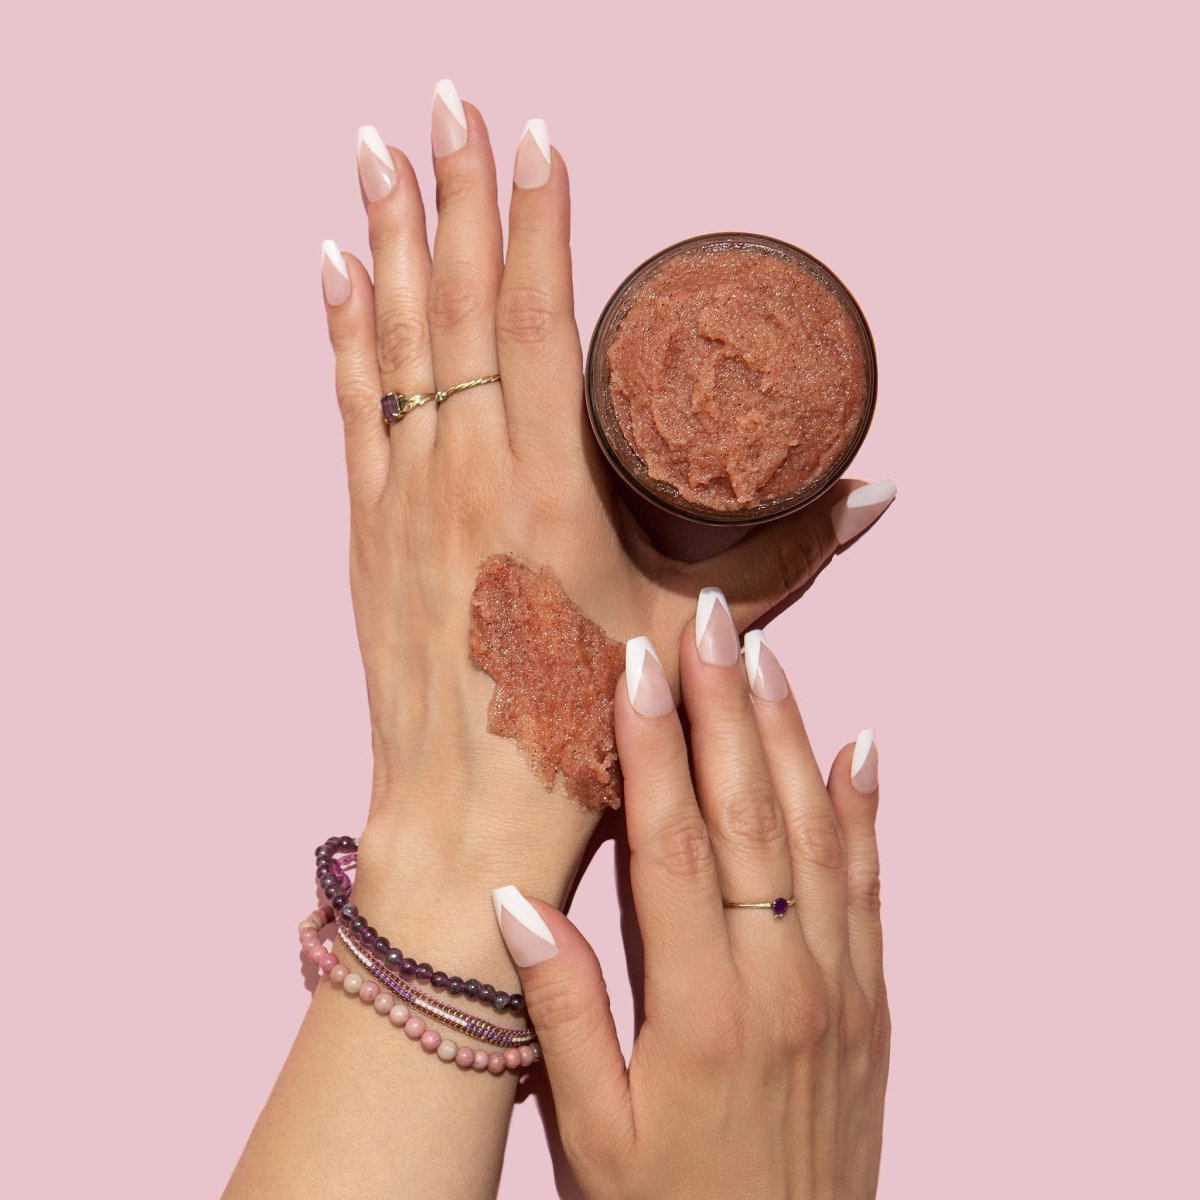 A model's hands apply a pale pink exfoliating mixture to the skin. Next to the hands is an open glass jar containing a pale pink exfoliating mixture. The Cactus Flower Exfoliant is from Nopalera and made in Brooklyn, NY.